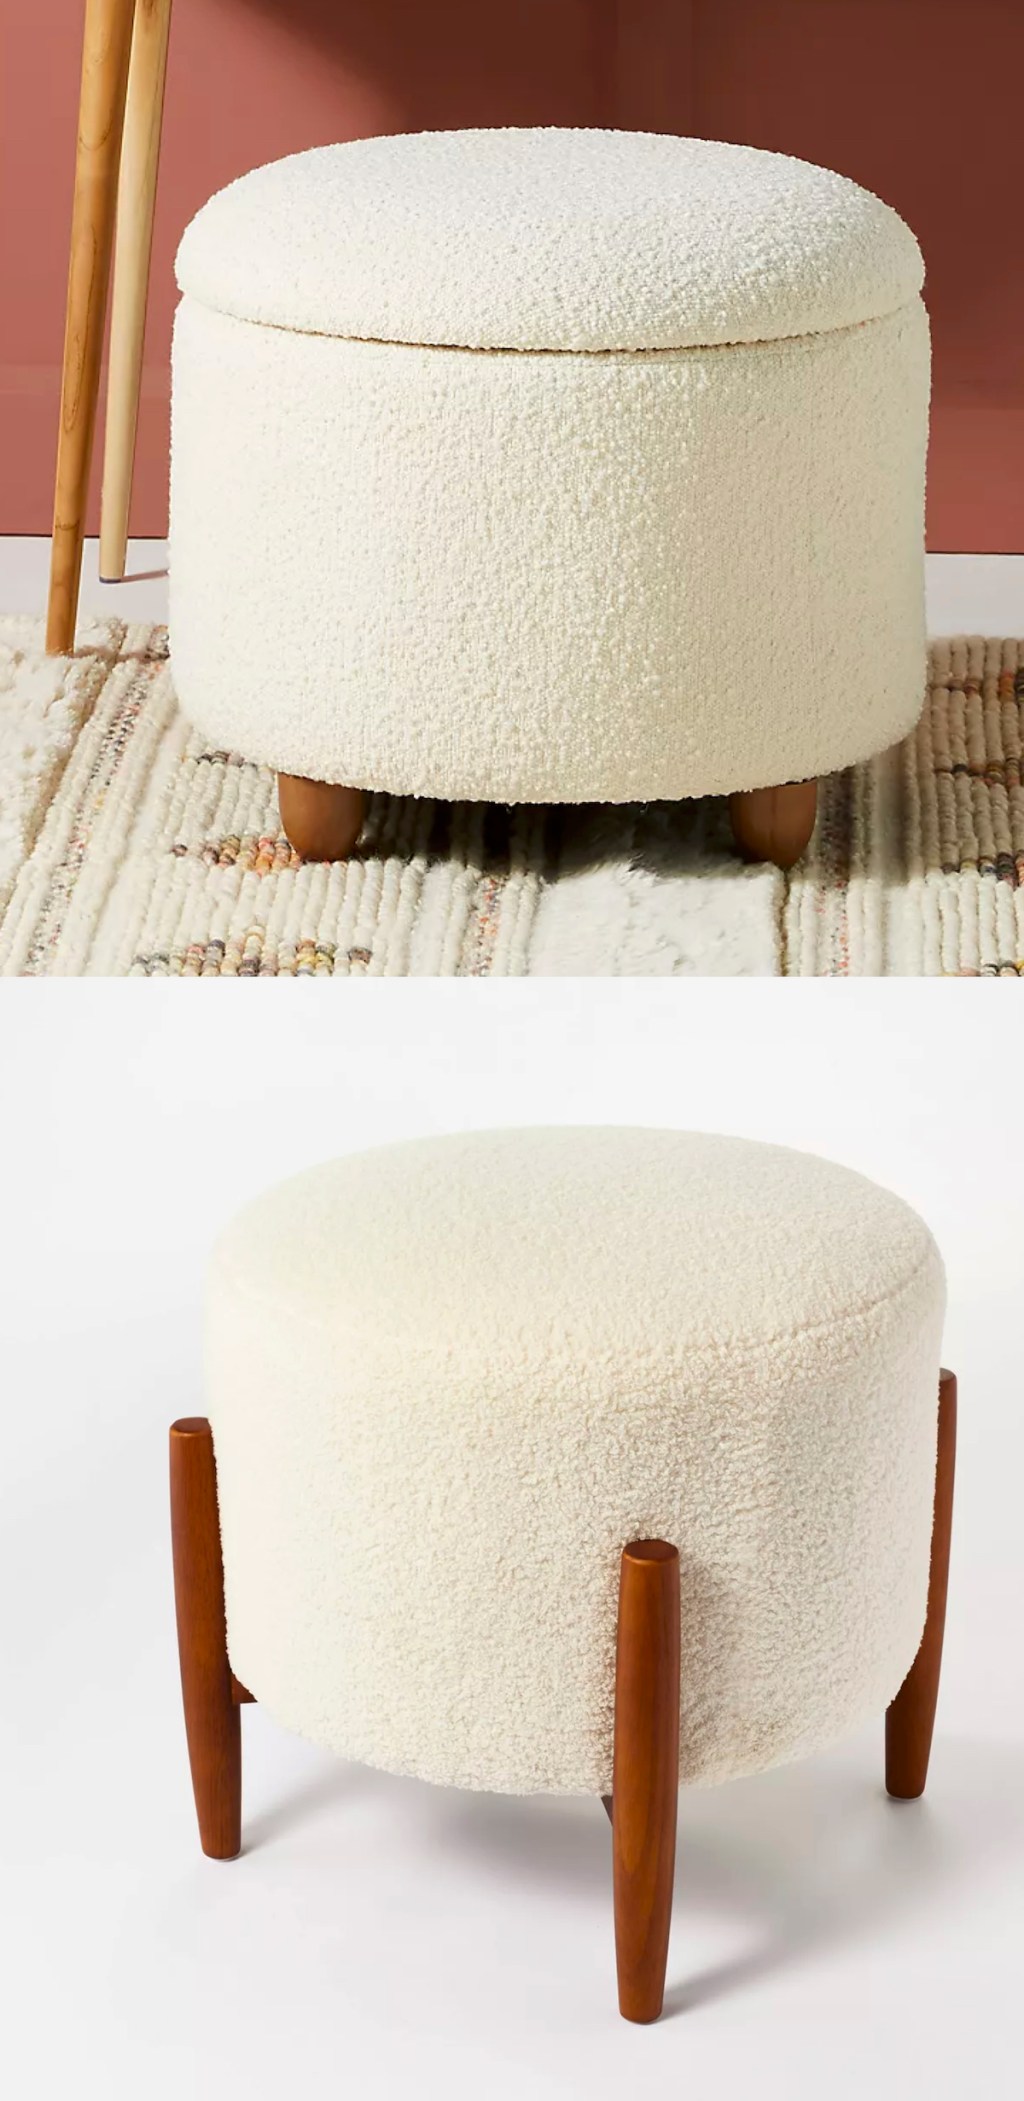 two sherpa cream ottomans with wood legs on stock photos